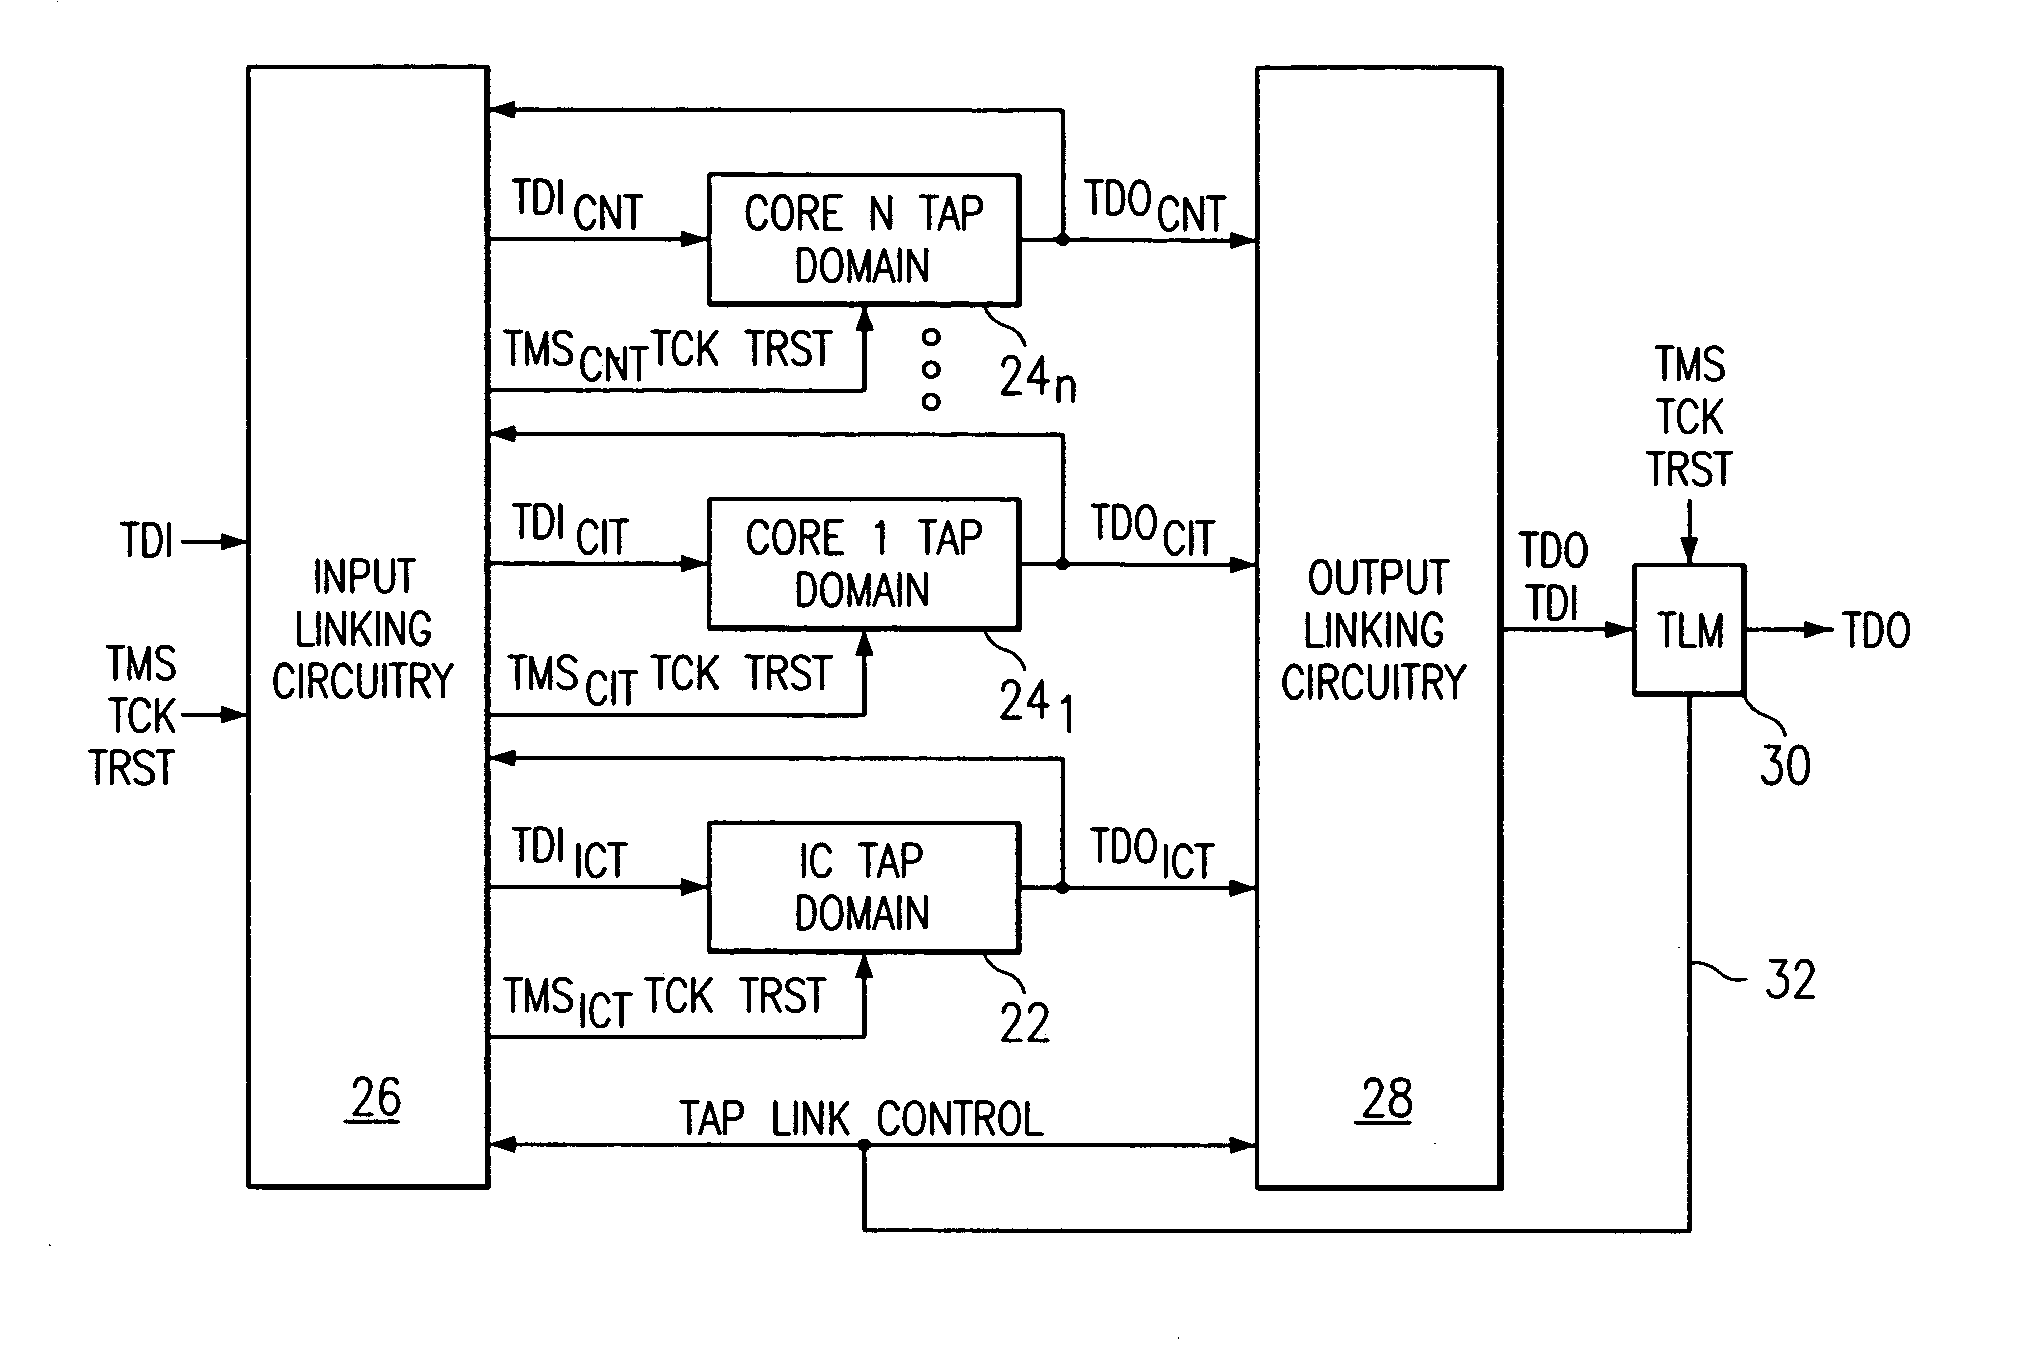 IC with linking module in series with TAP circuitry